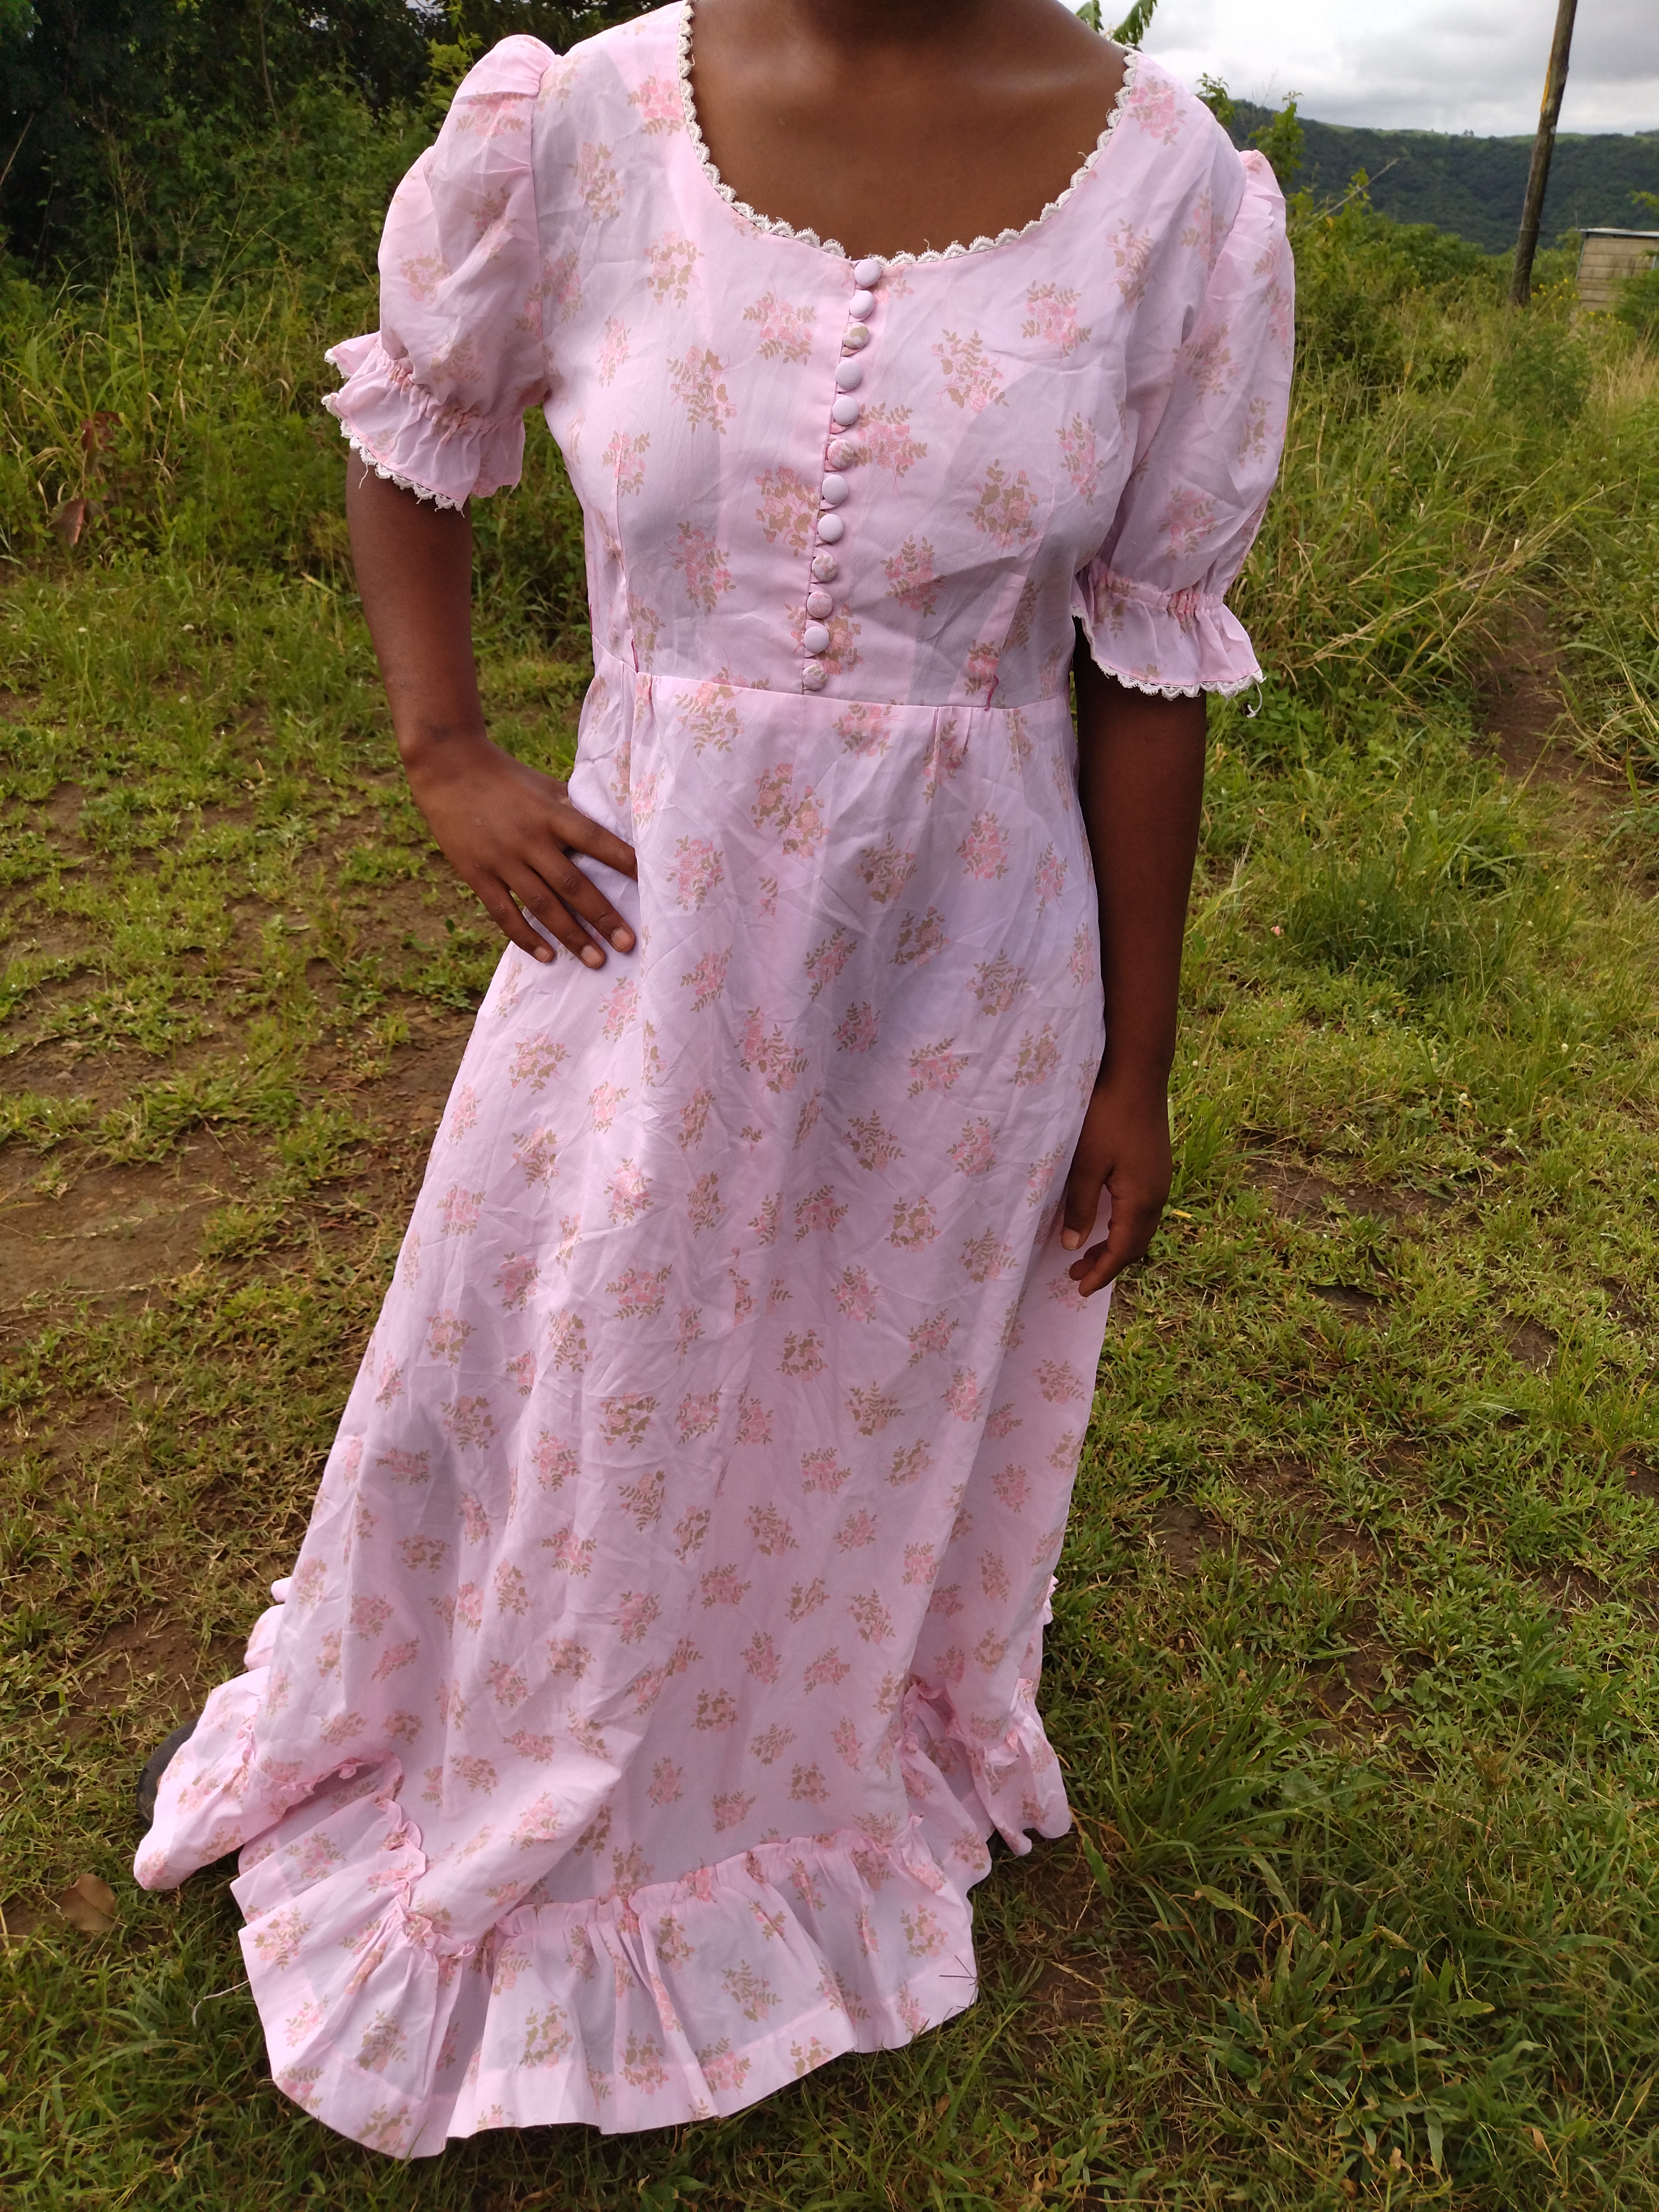 Vintage Floral Dress, handmade with chest button-down 